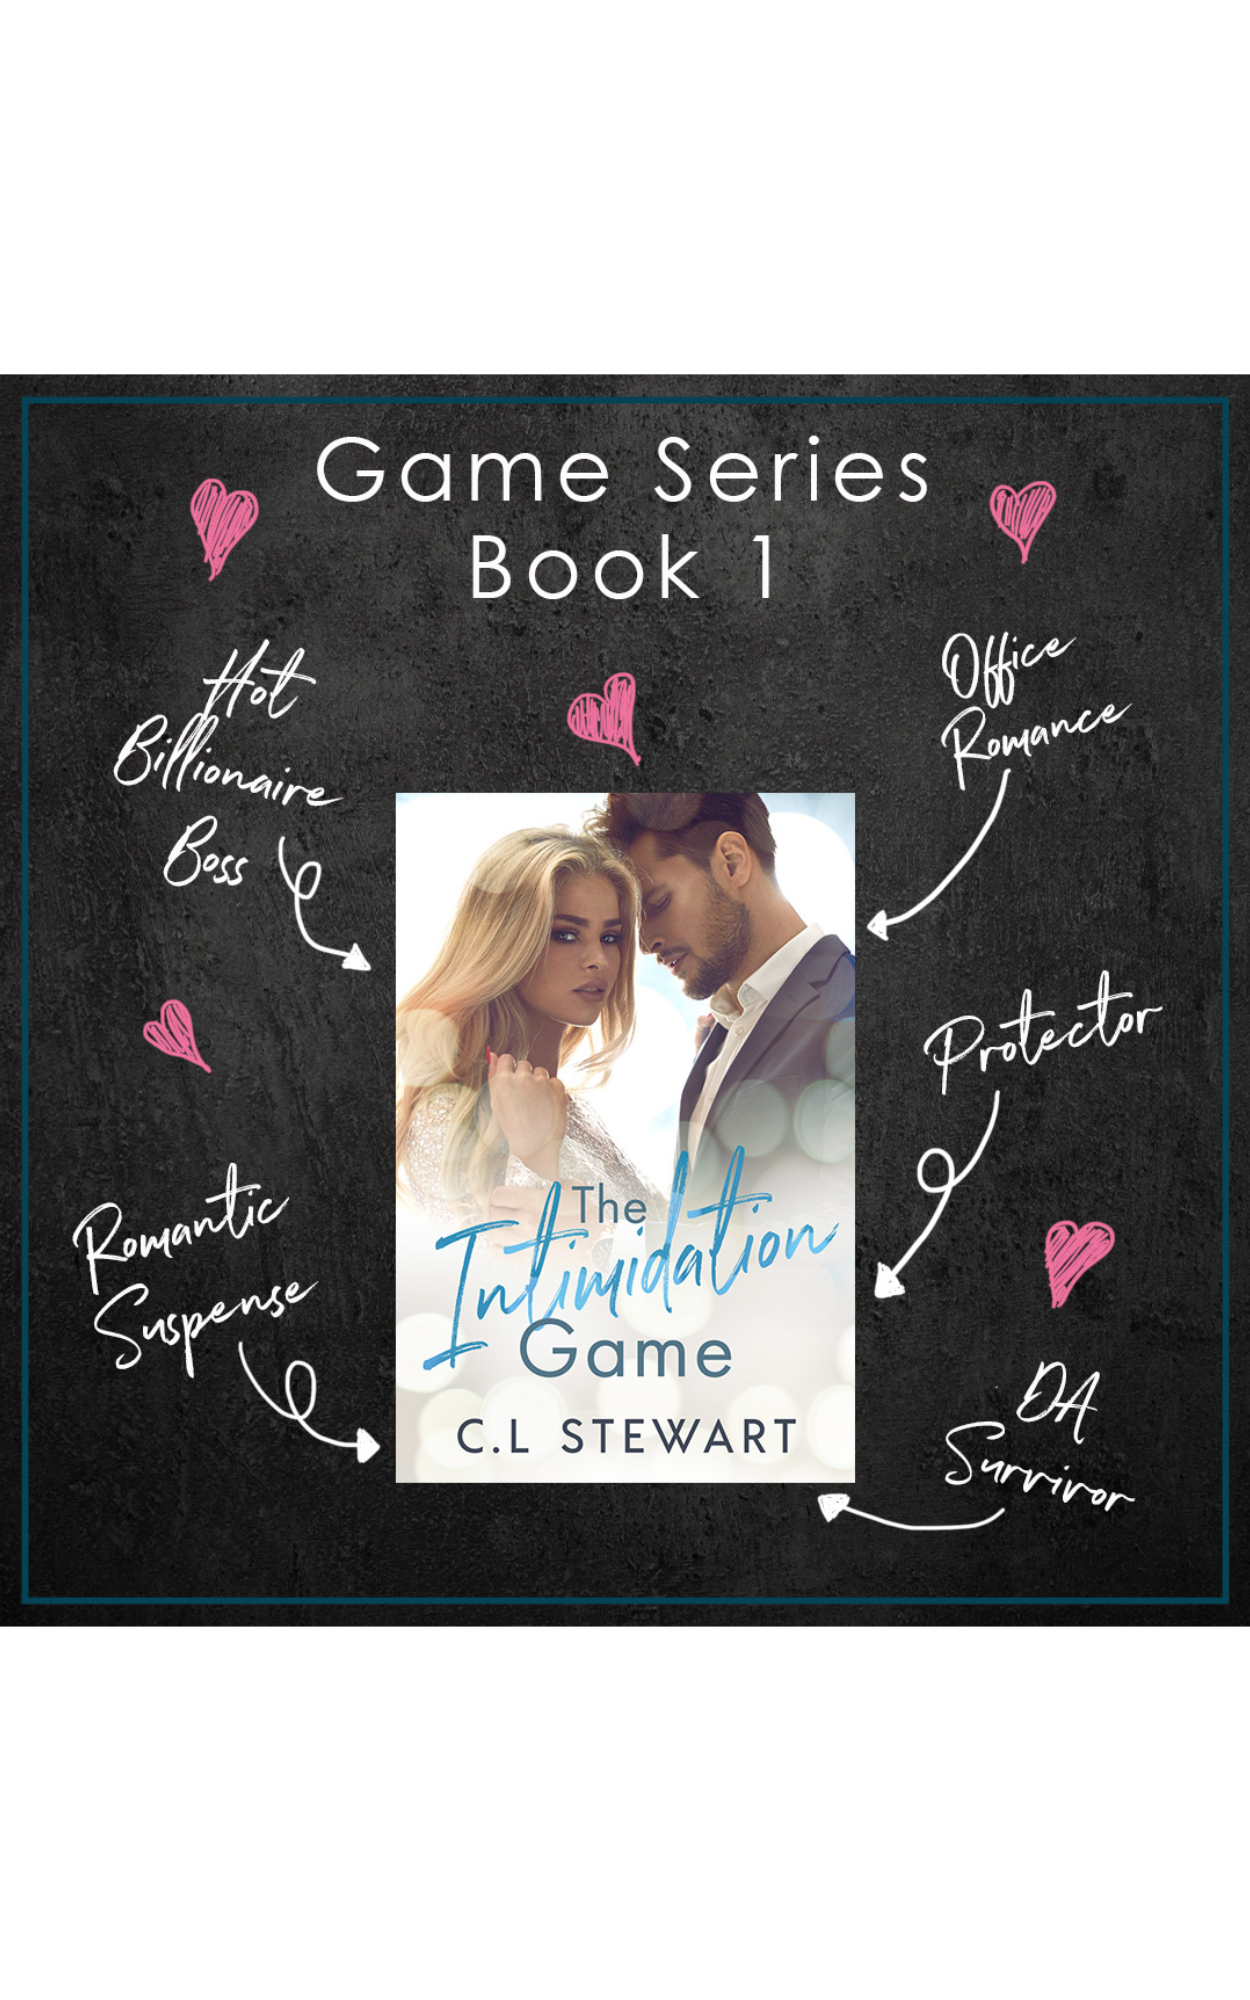 Game Series Book 1 - The Intimidation Game